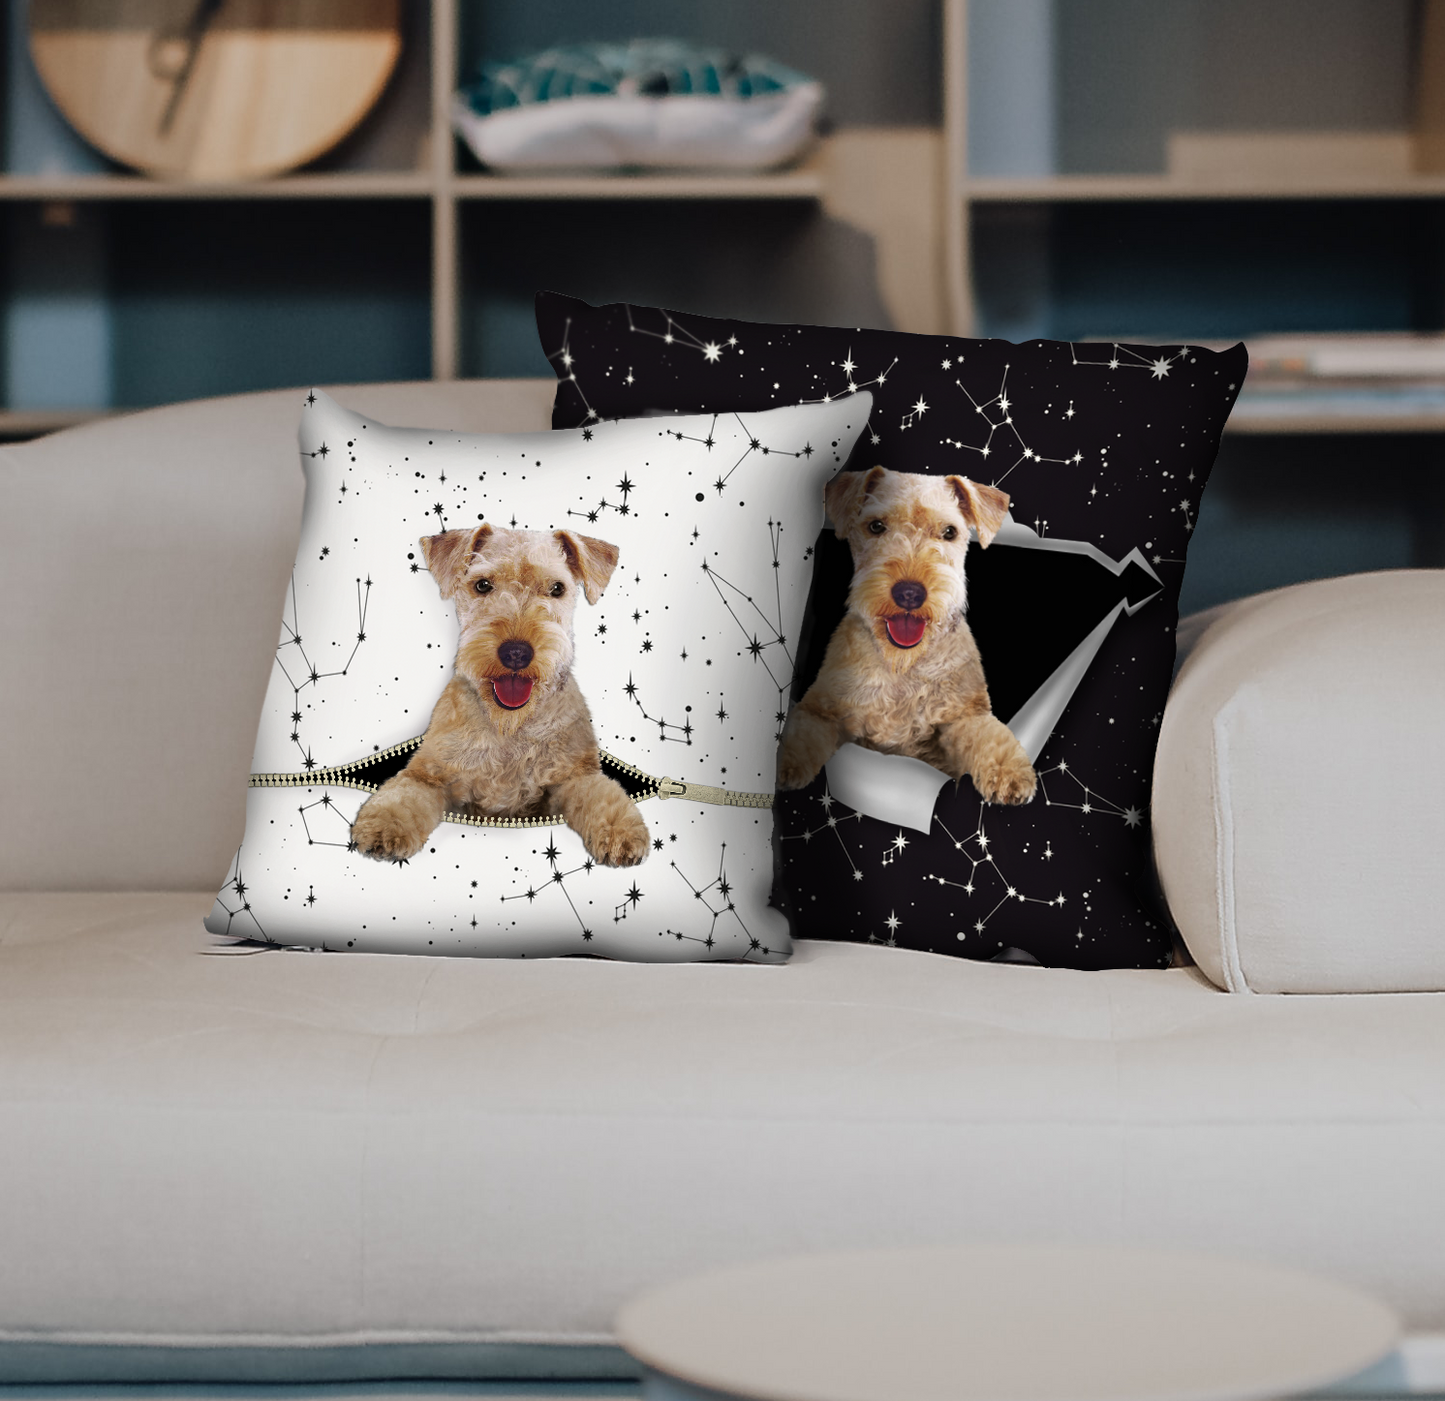 They Steal Your Couch - Lakeland Terrier Pillow Cases V1 (Set of 2)